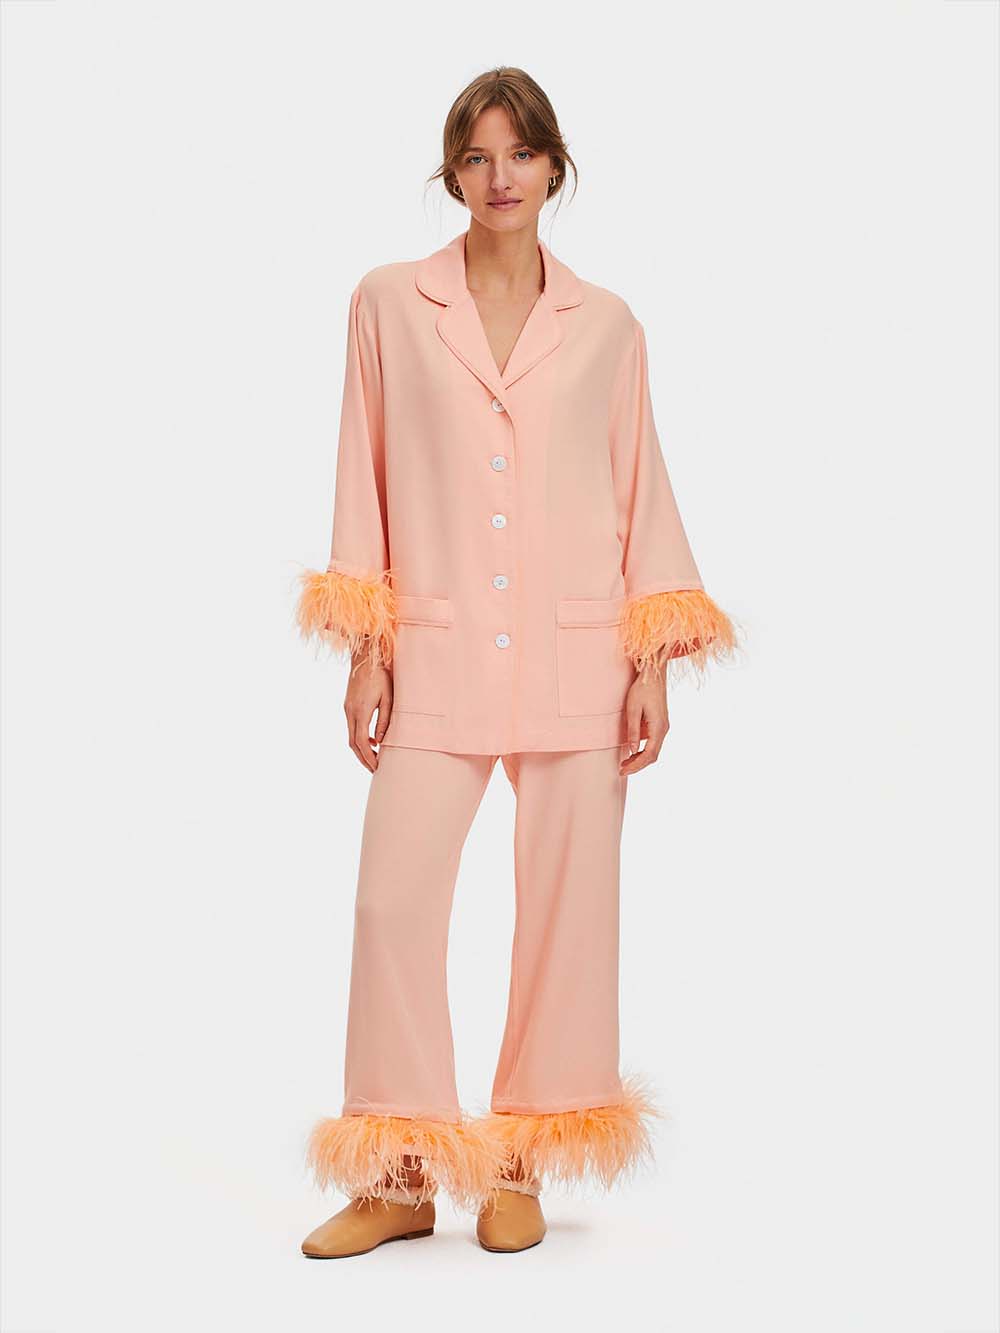 Peach coloured party pyjama with feathers by The Sleeper